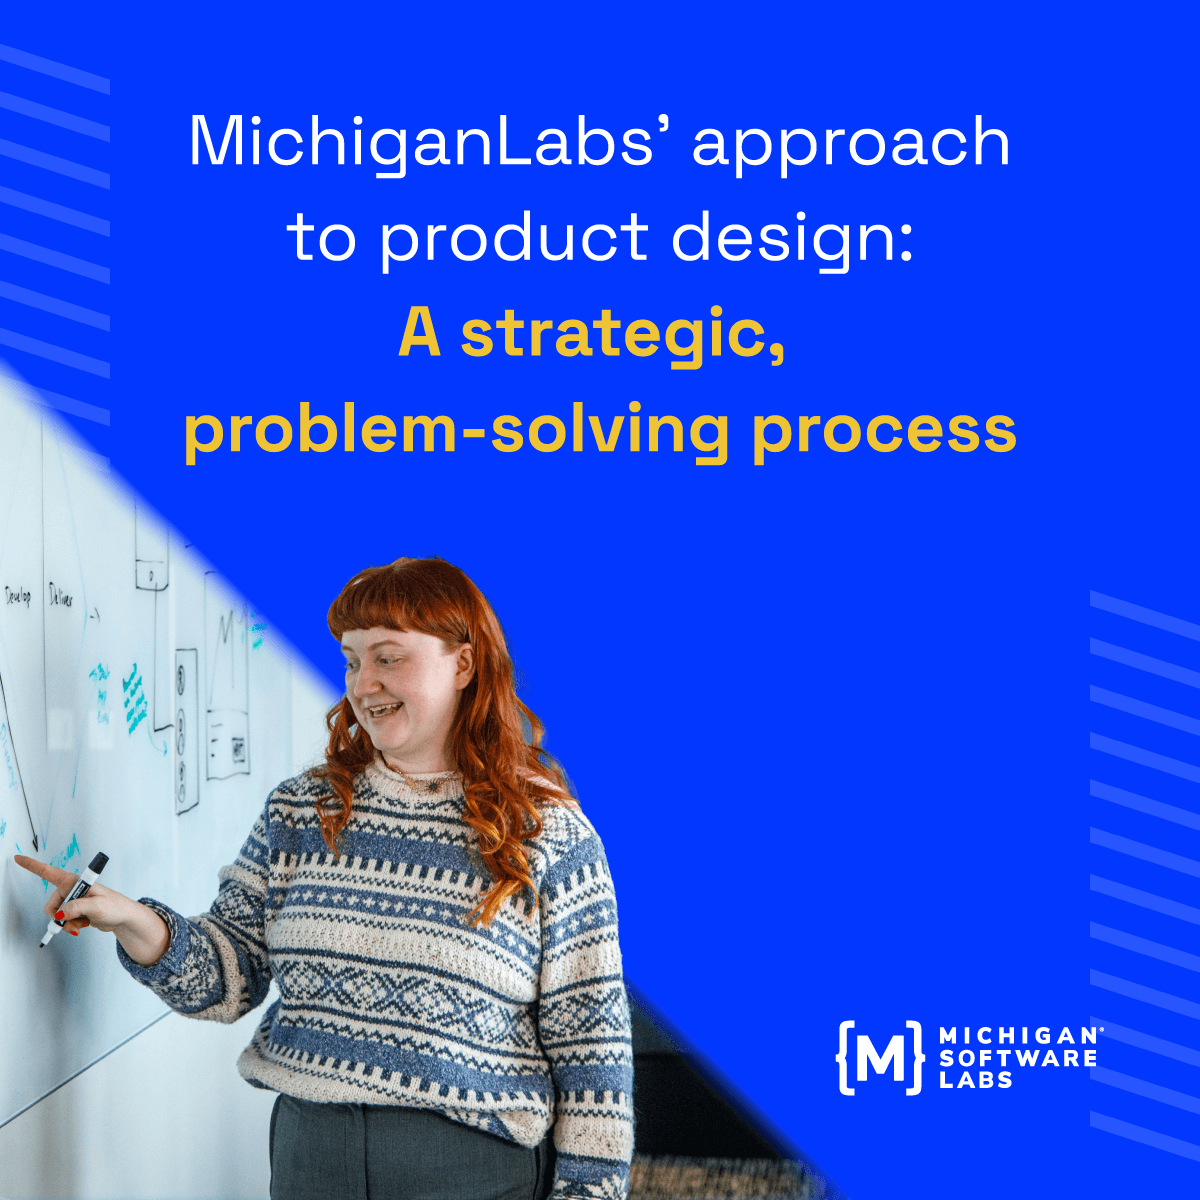 MichiganLabs’ approach to product design: A strategic, problem-solving process